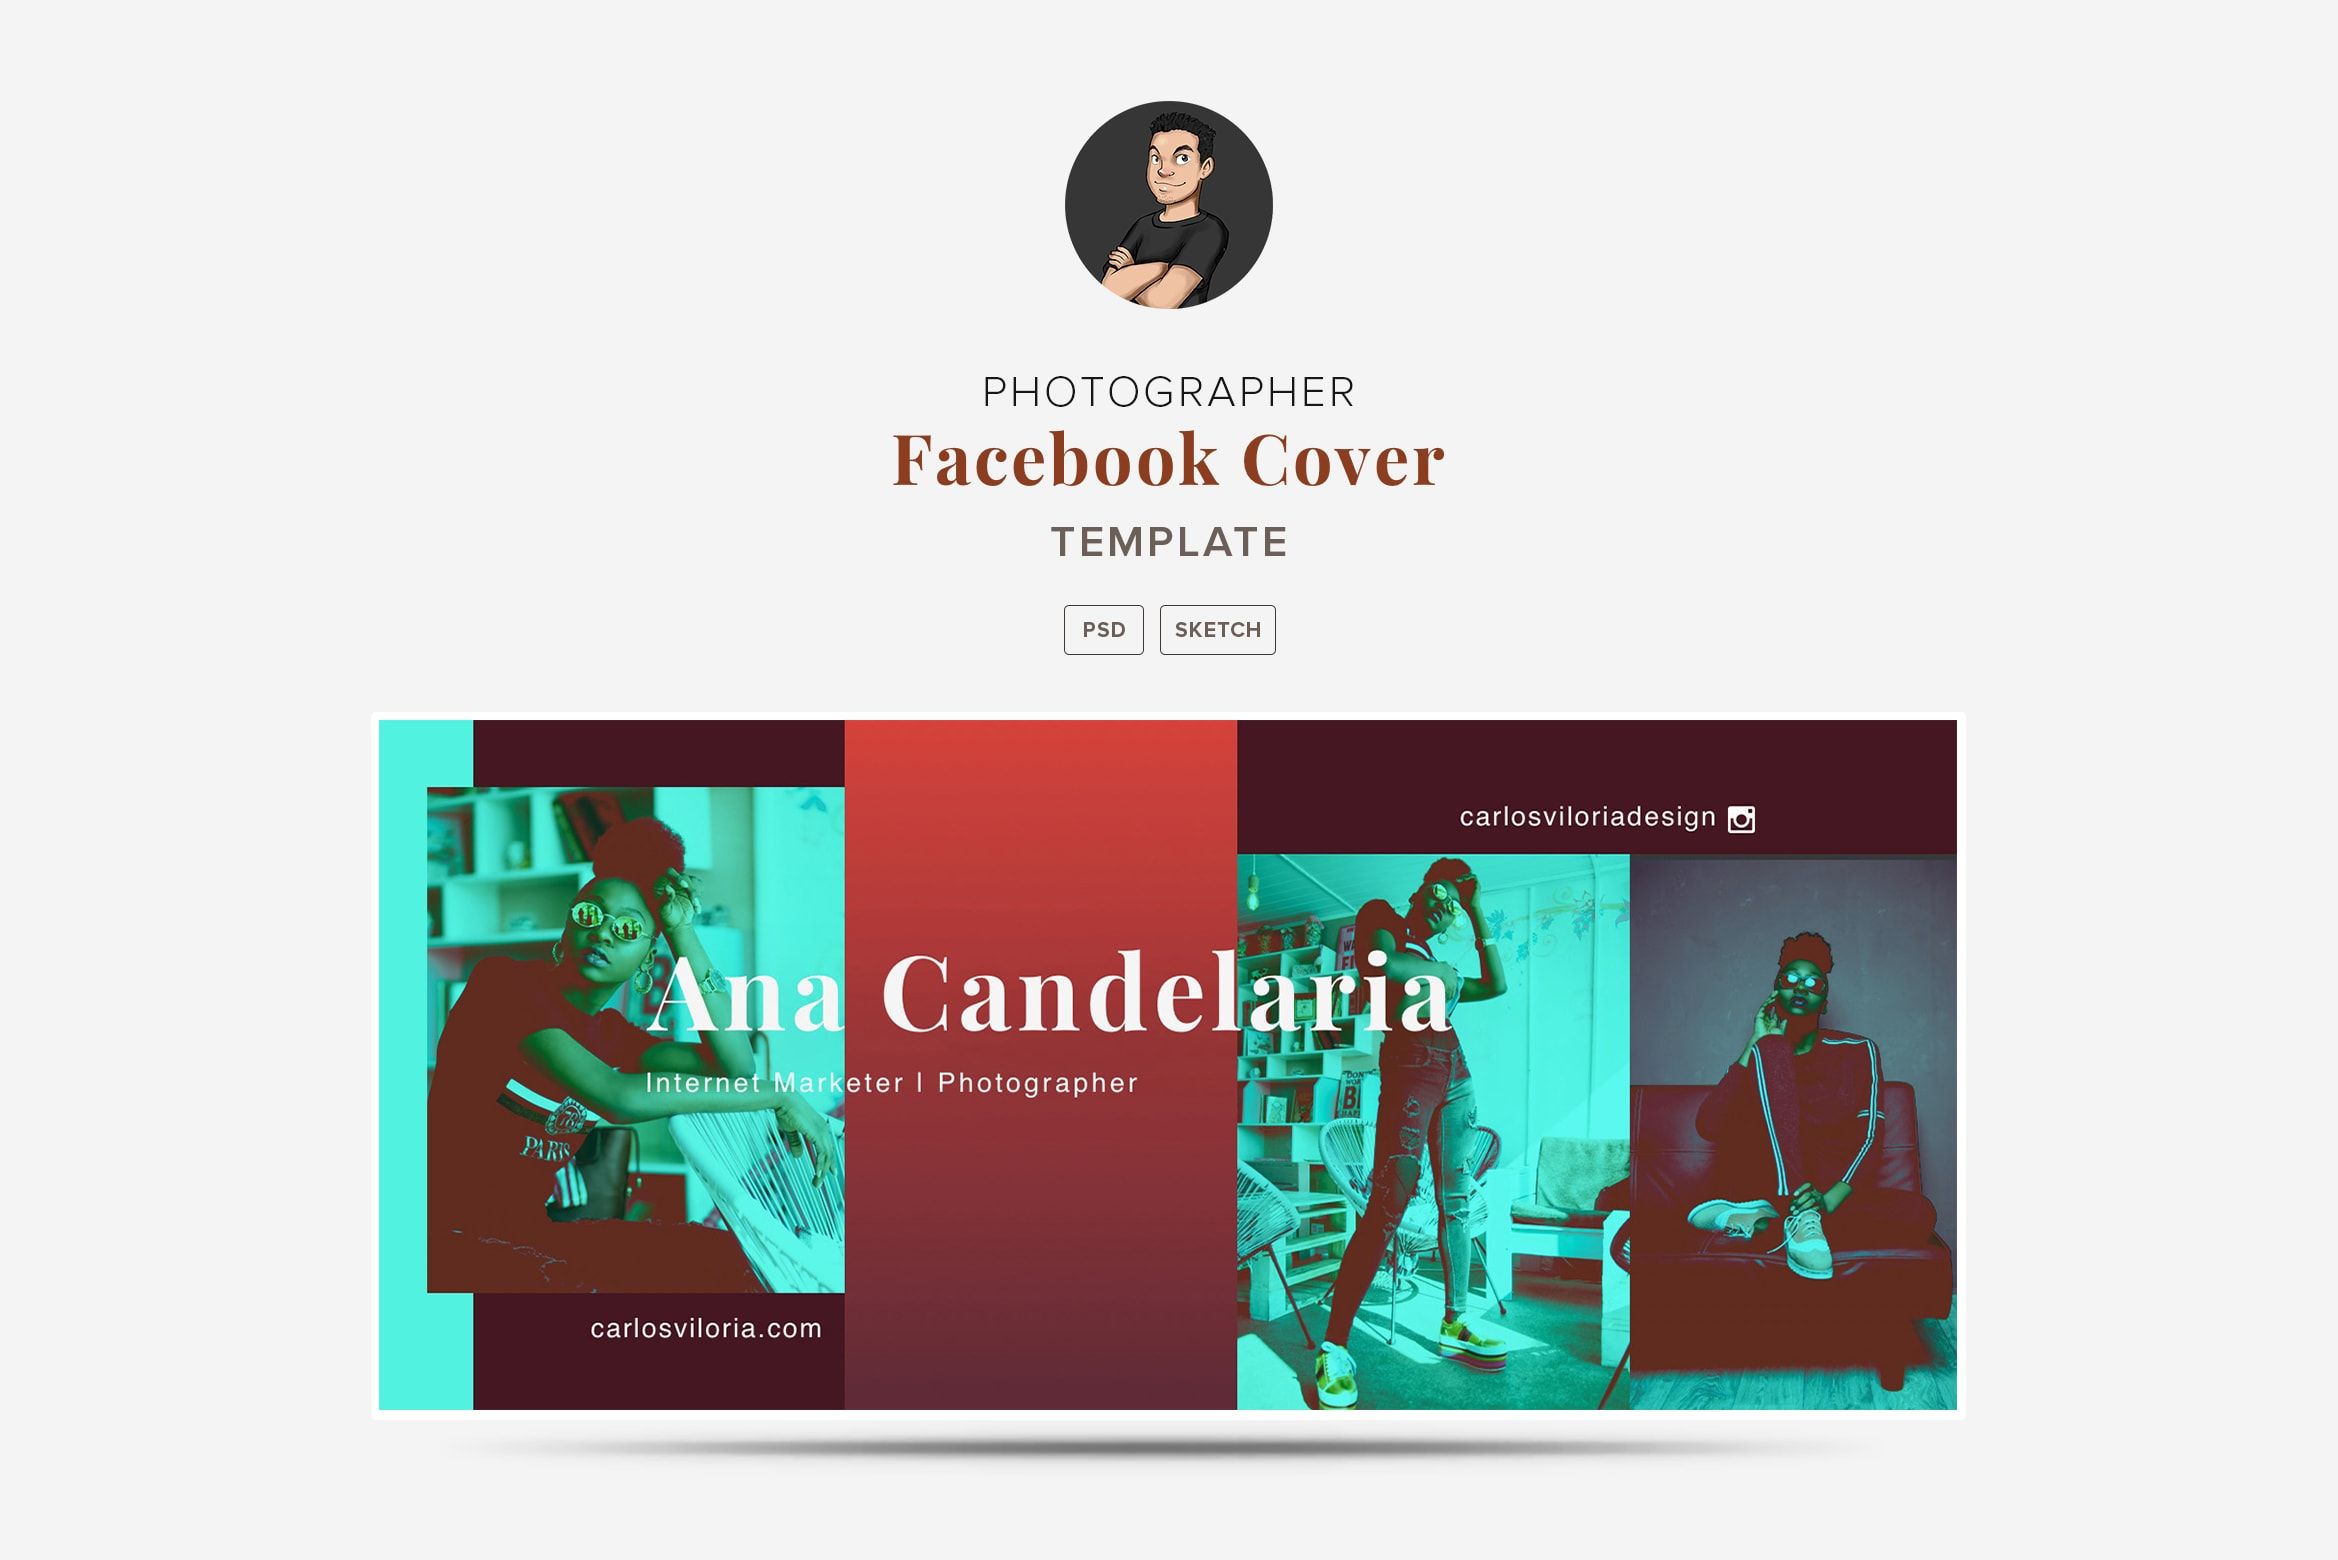 Facebook Cover Template 02 for Photography